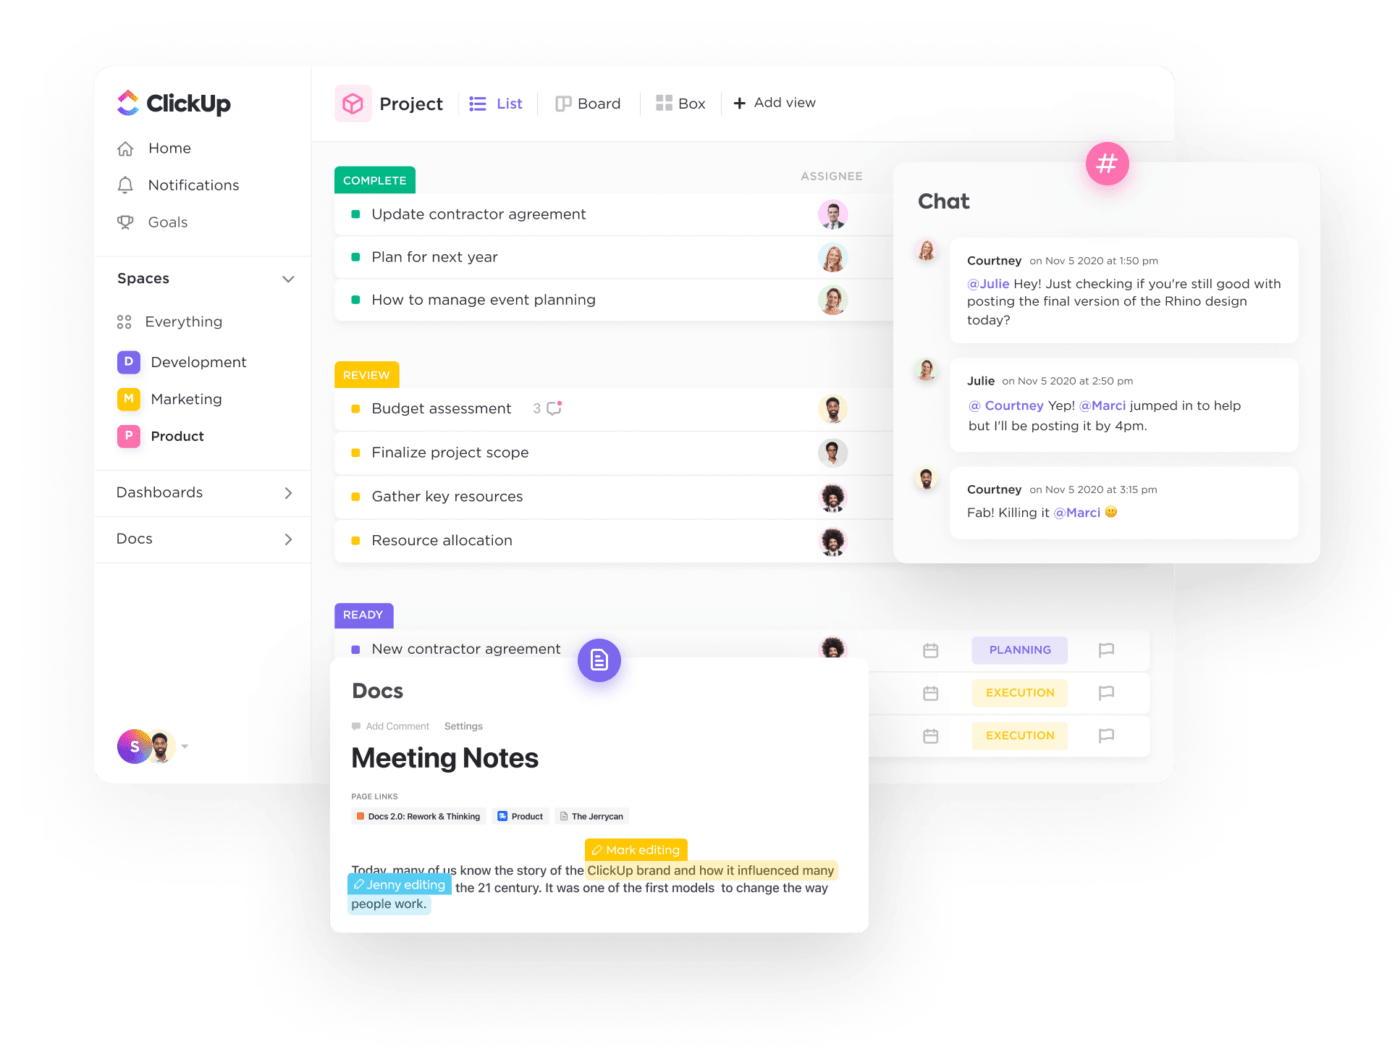 ClickUp Docs, Chat view, and List view